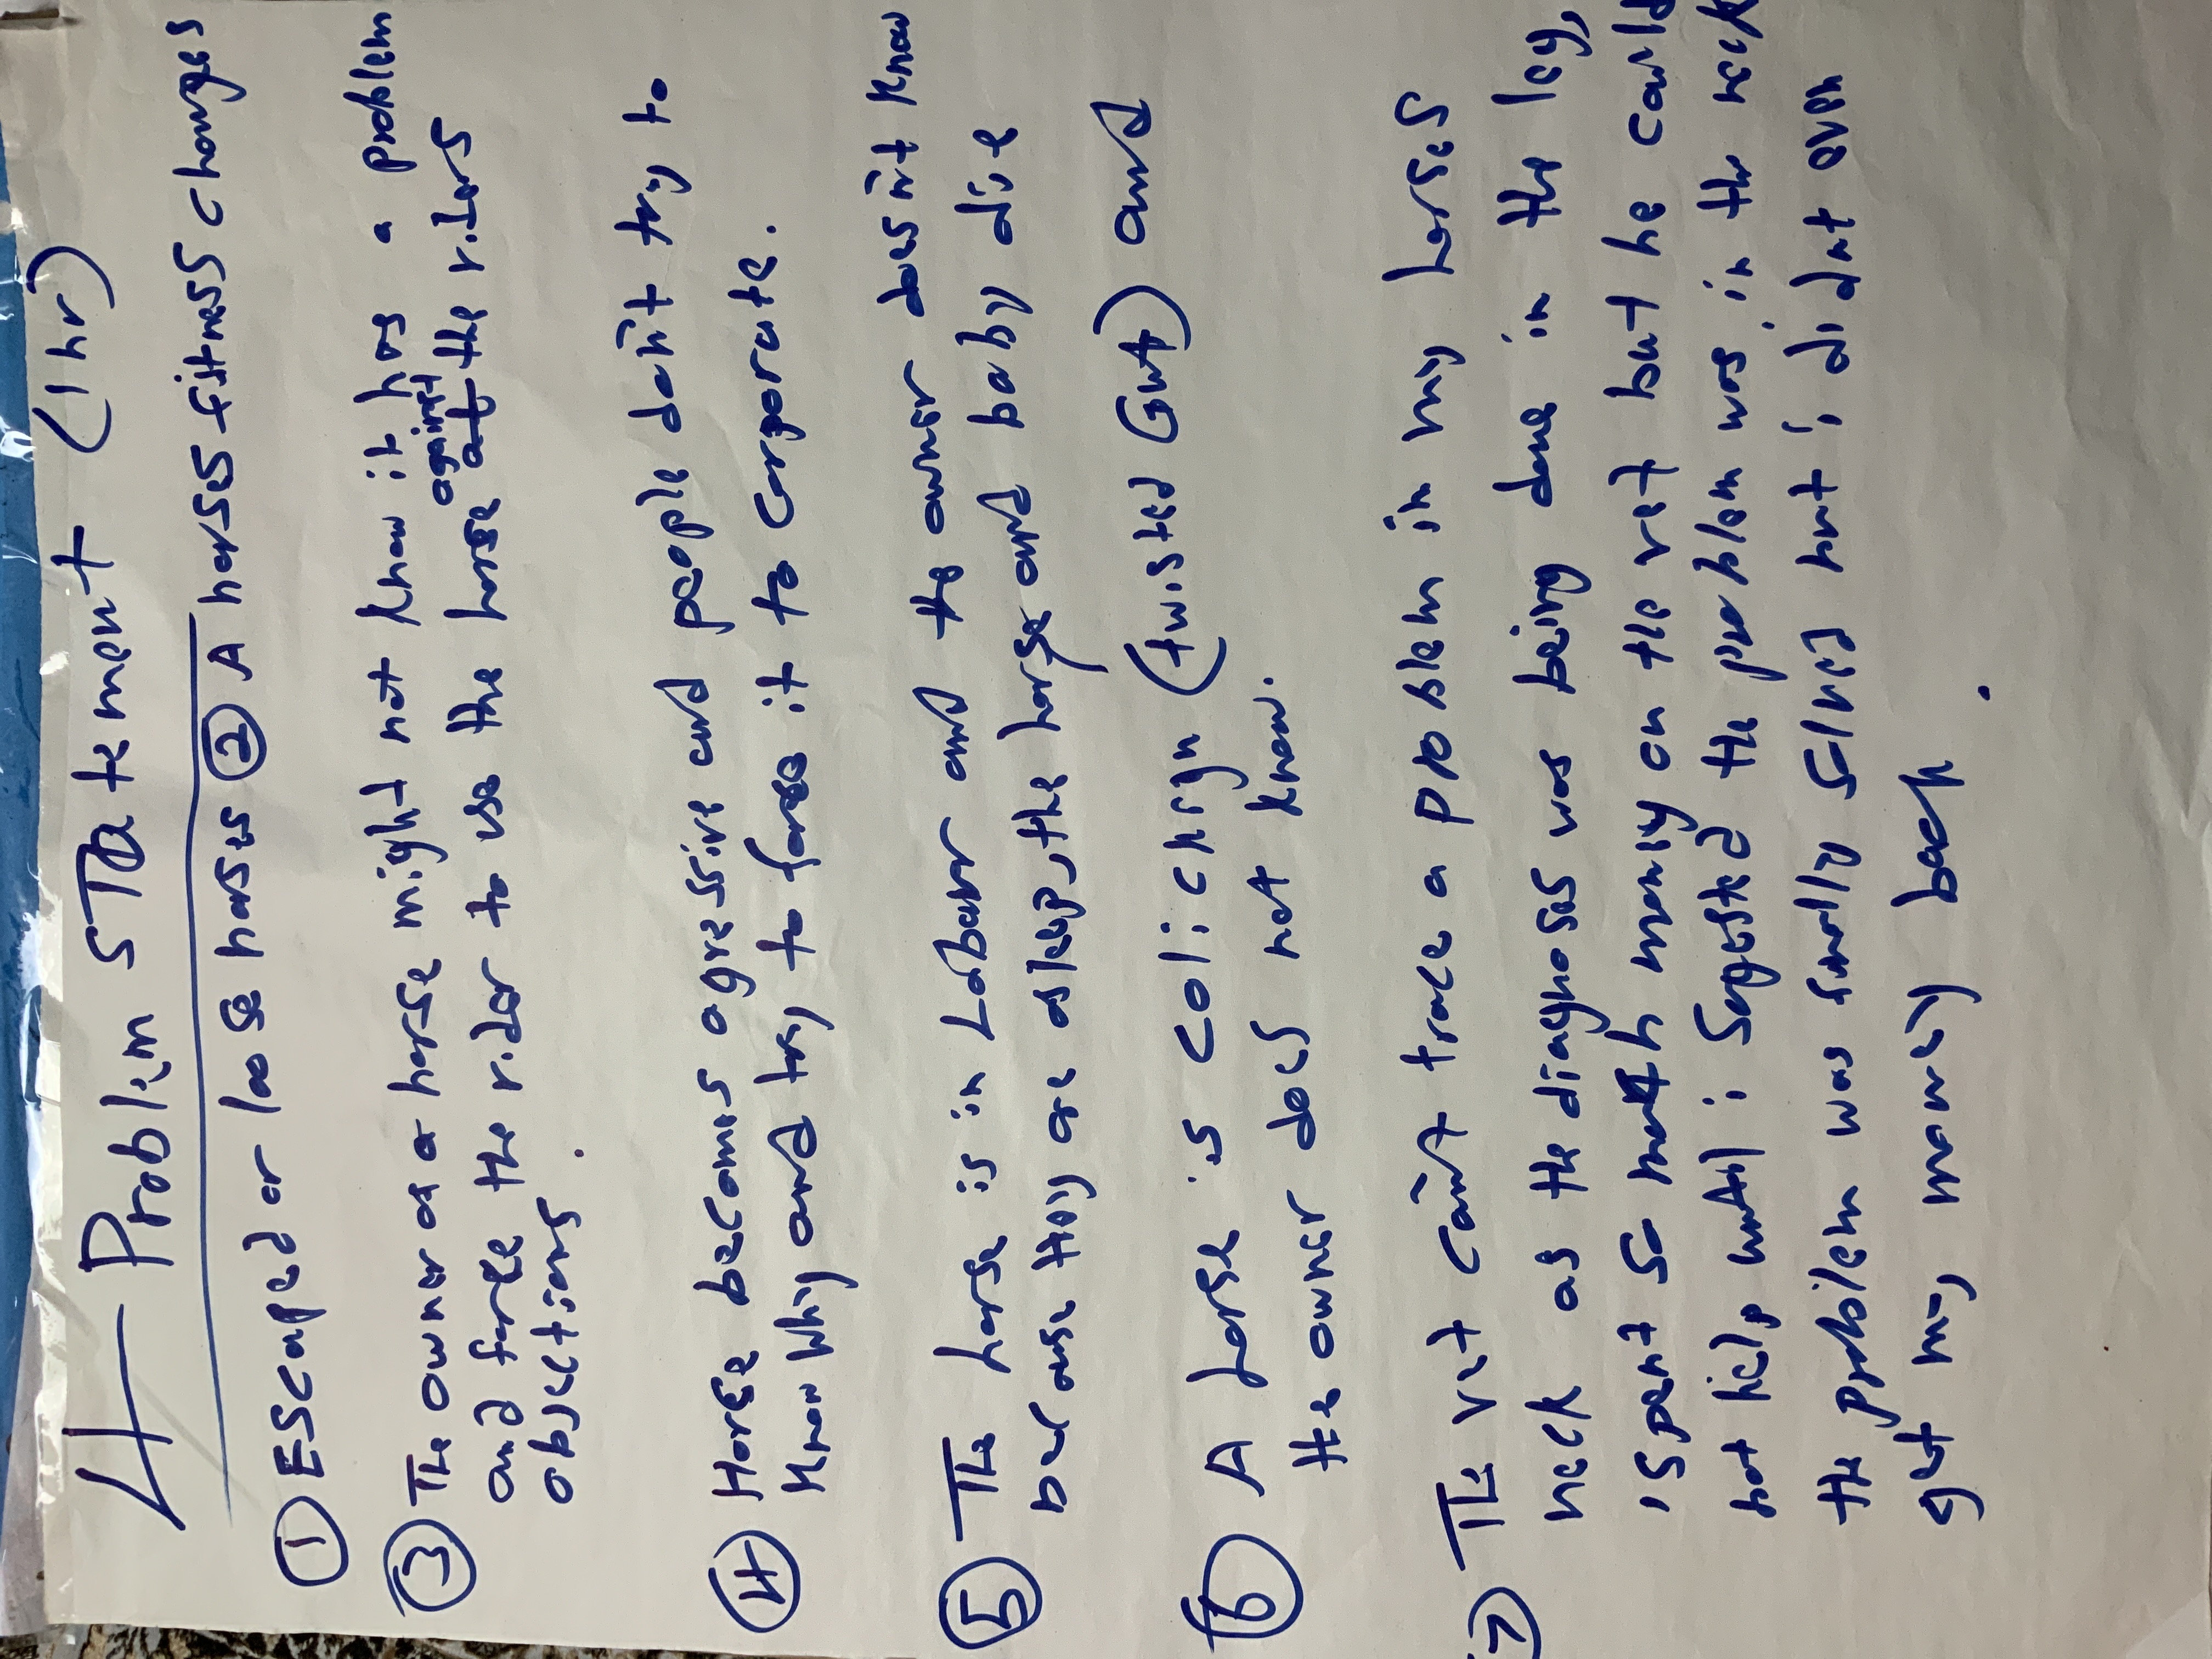 Abdul's portolio project tittled: N9, a Fitbit for Horses. image of written problem statement on paper.